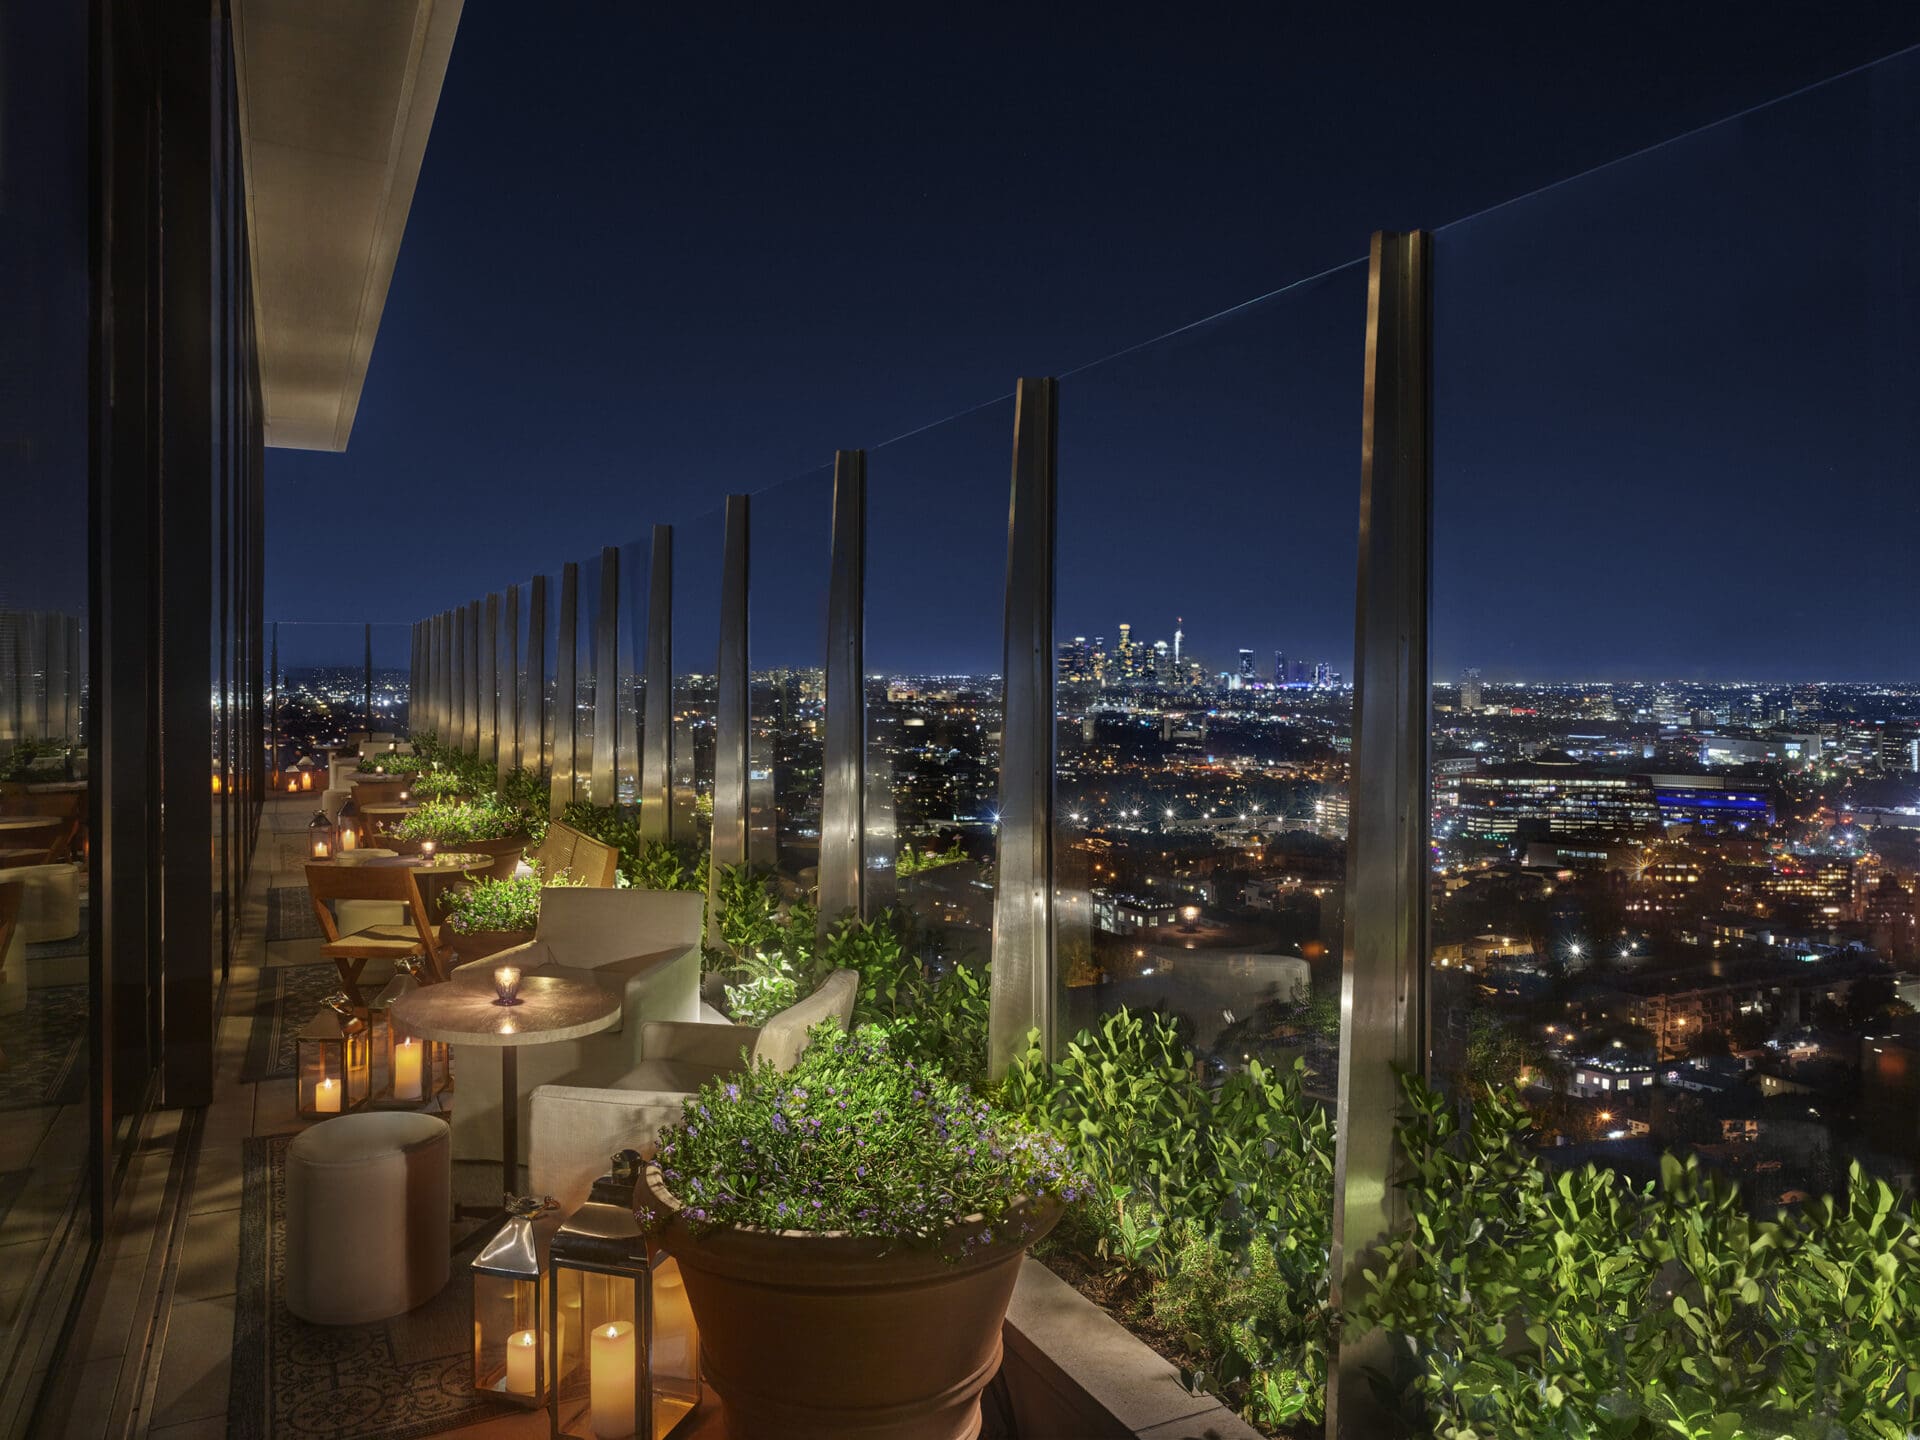 Best rooftop bars LA | Upstairs bar at the West Hollywood EDITION at night, with intimate table topped with glowing tea lights, and views over LA